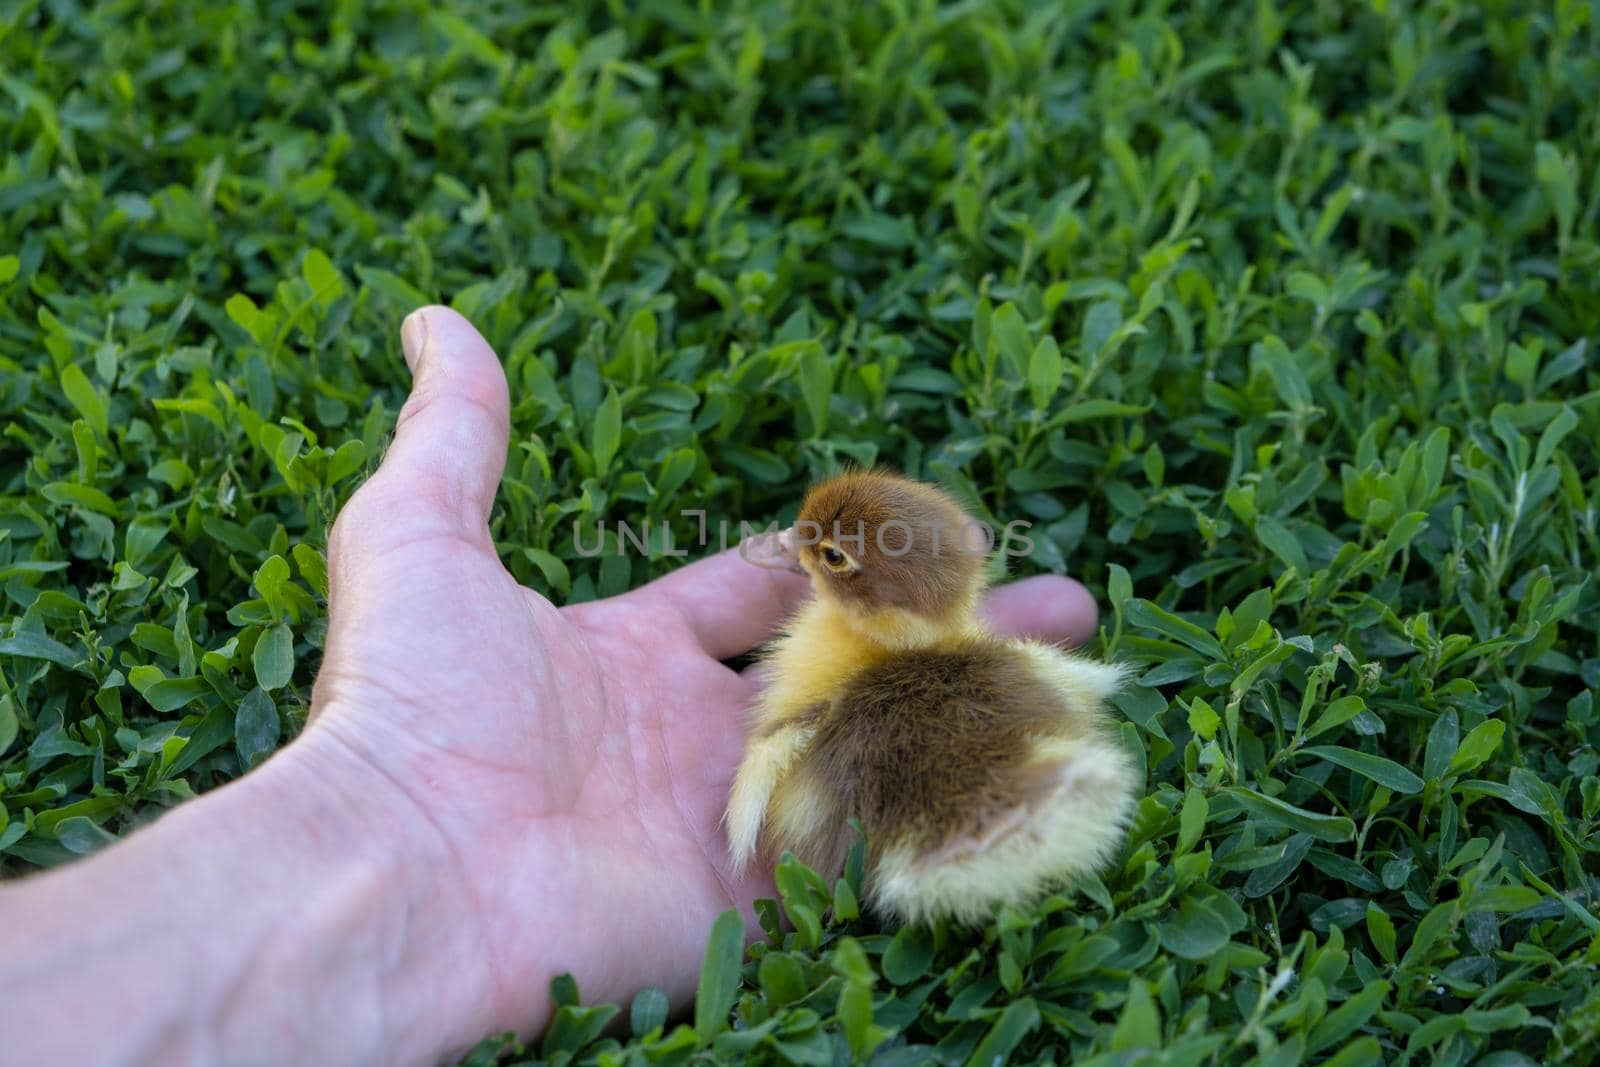 new born beautiful duckling in hand. duckling on grass